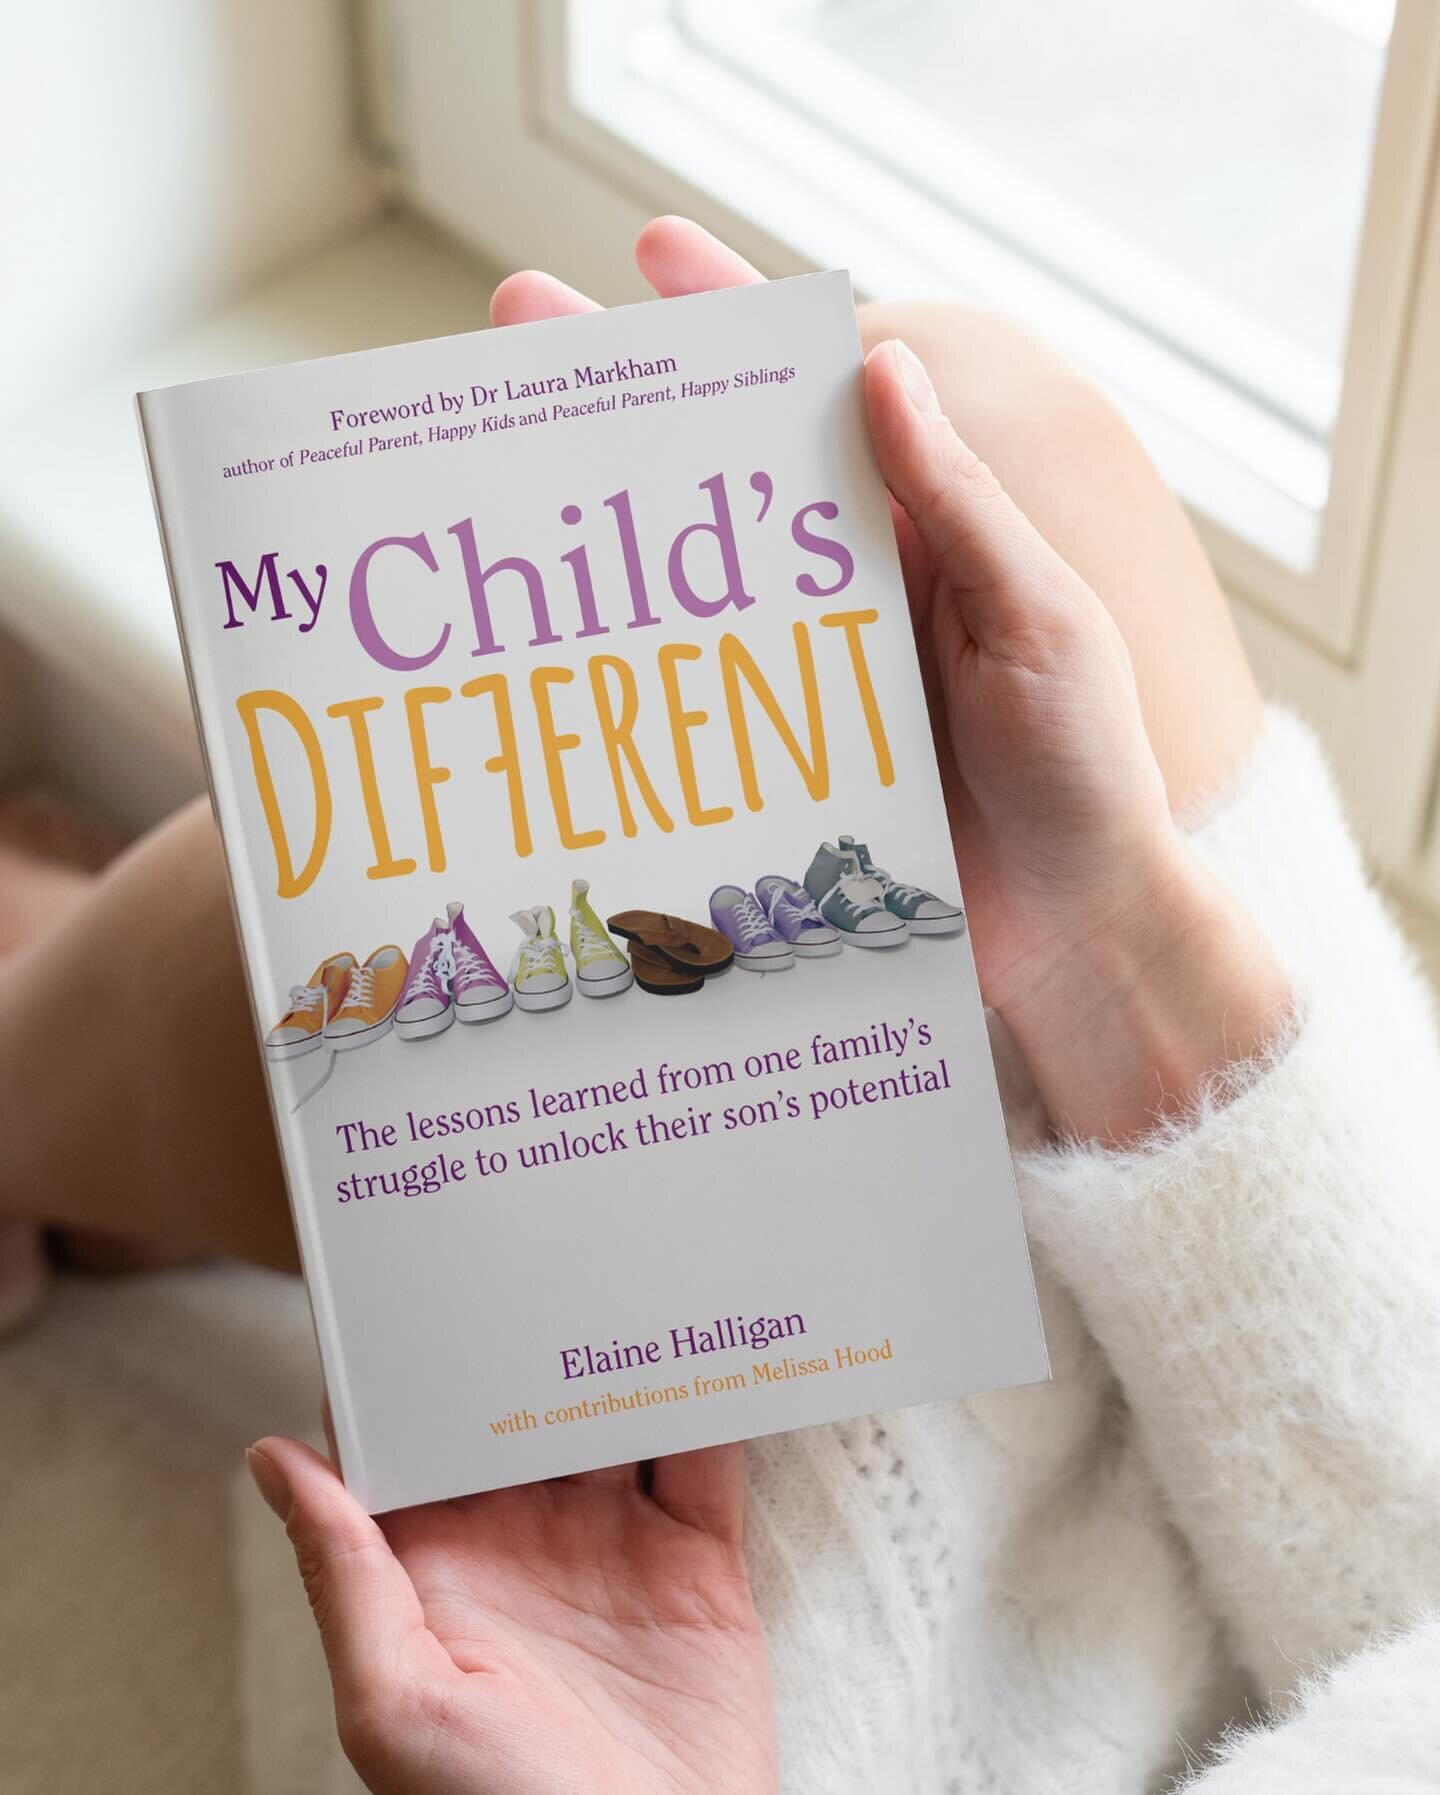 For all you new followers, I wrote a book in back in 2018 about my challenging parenting journey. It is a story of hope and optimism, because if I can do it, so can you! It explores the enabling role that parents can play in maximising the potential 